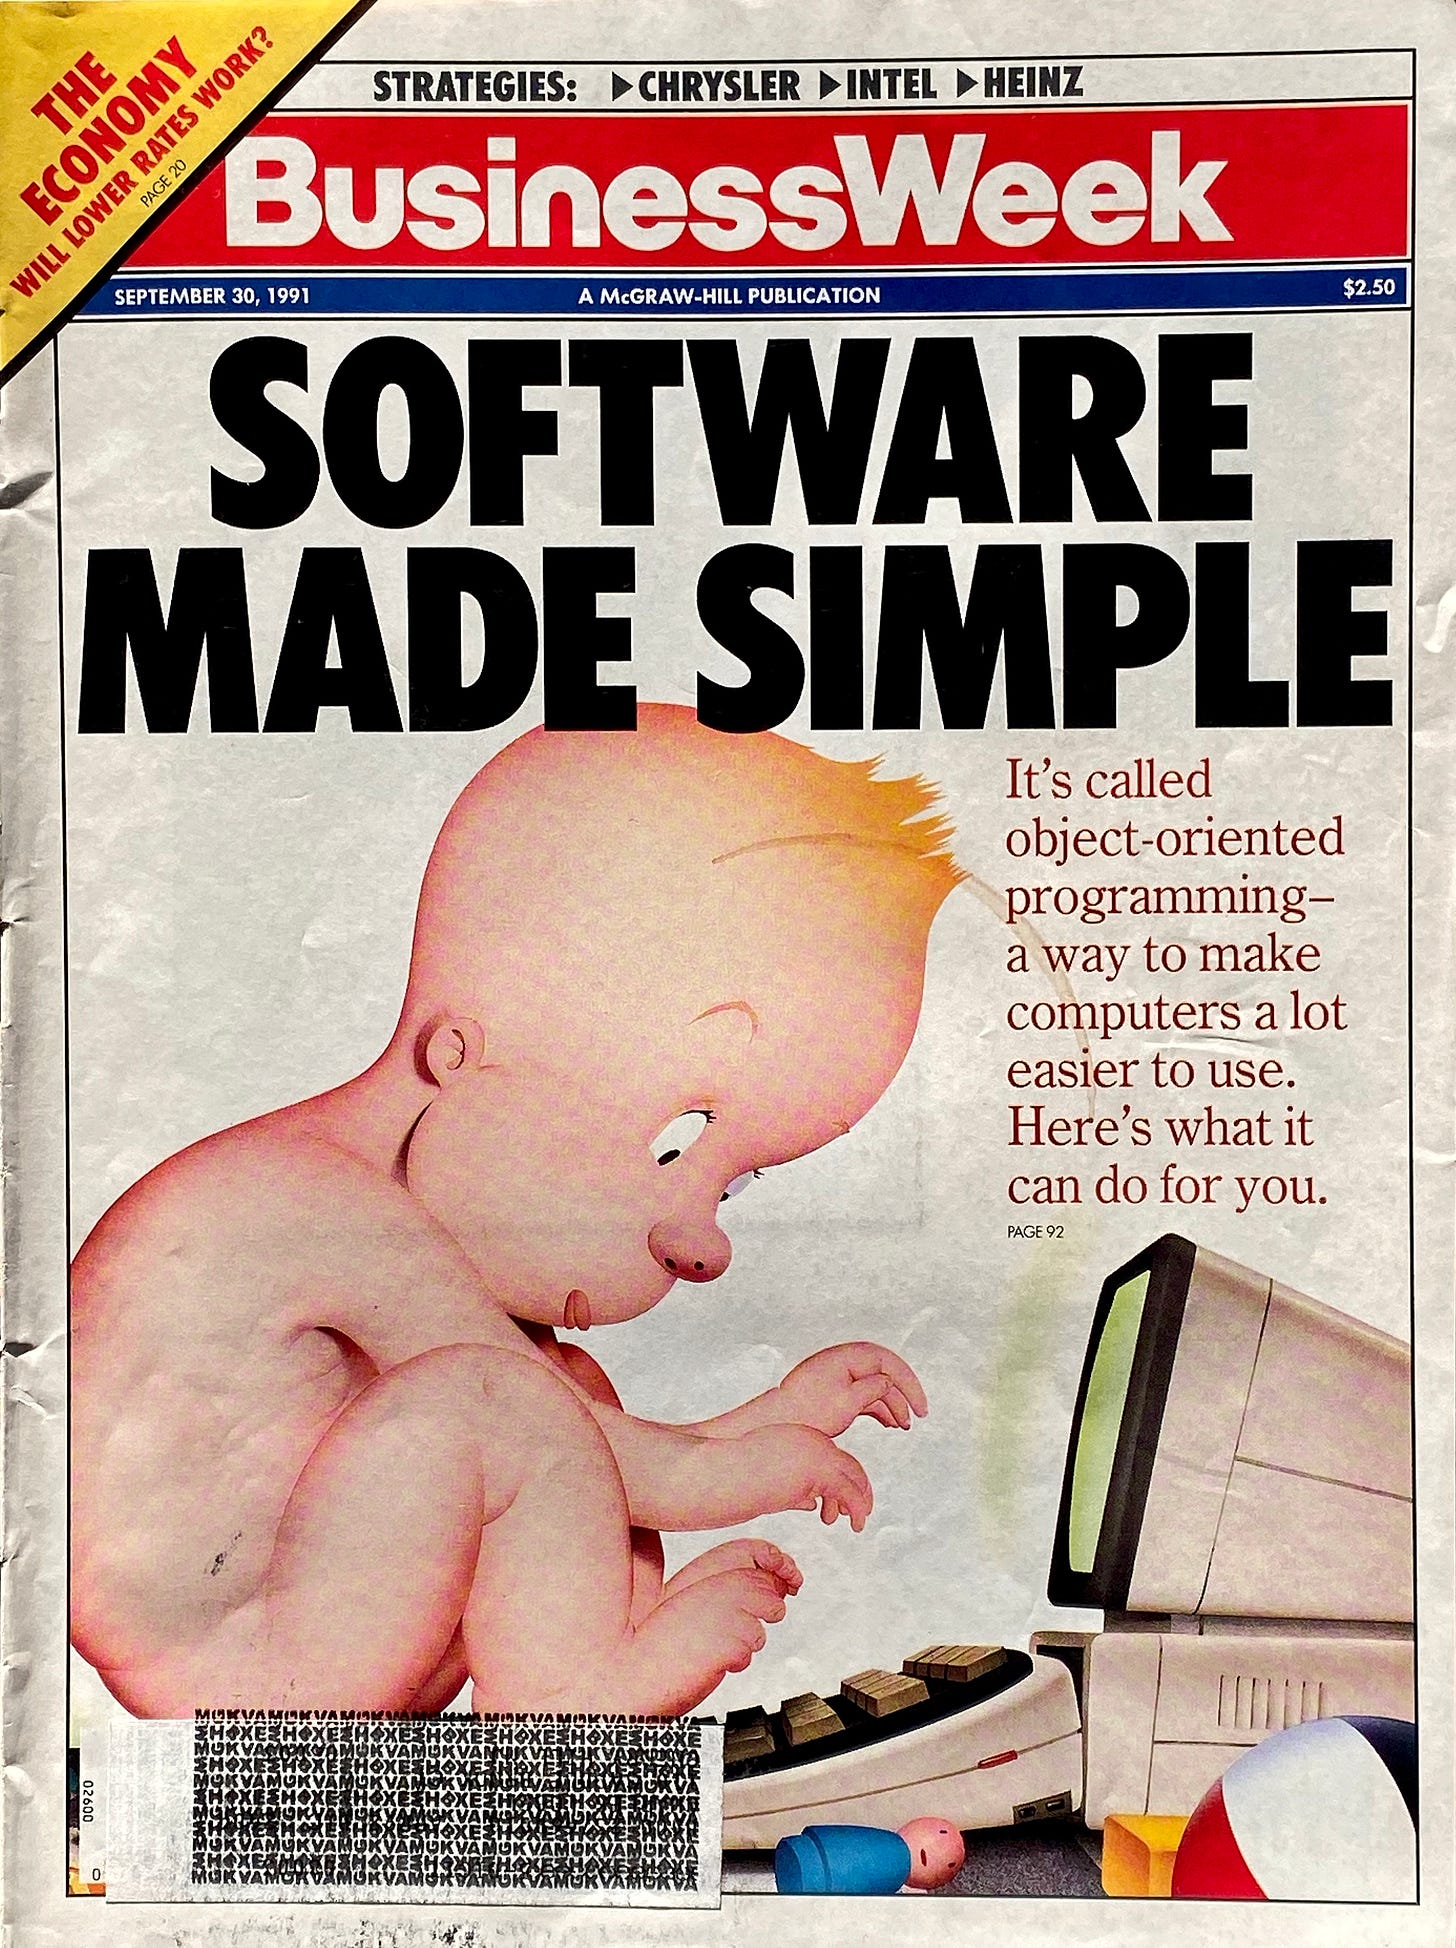 BusinessWeek magazine cover: Software Made Simple with a drawing of a baby sitting at a computer (in diapers): "Its called object-oriented programming-a way to make computers a lot easier to use. Here's what it can do for you."